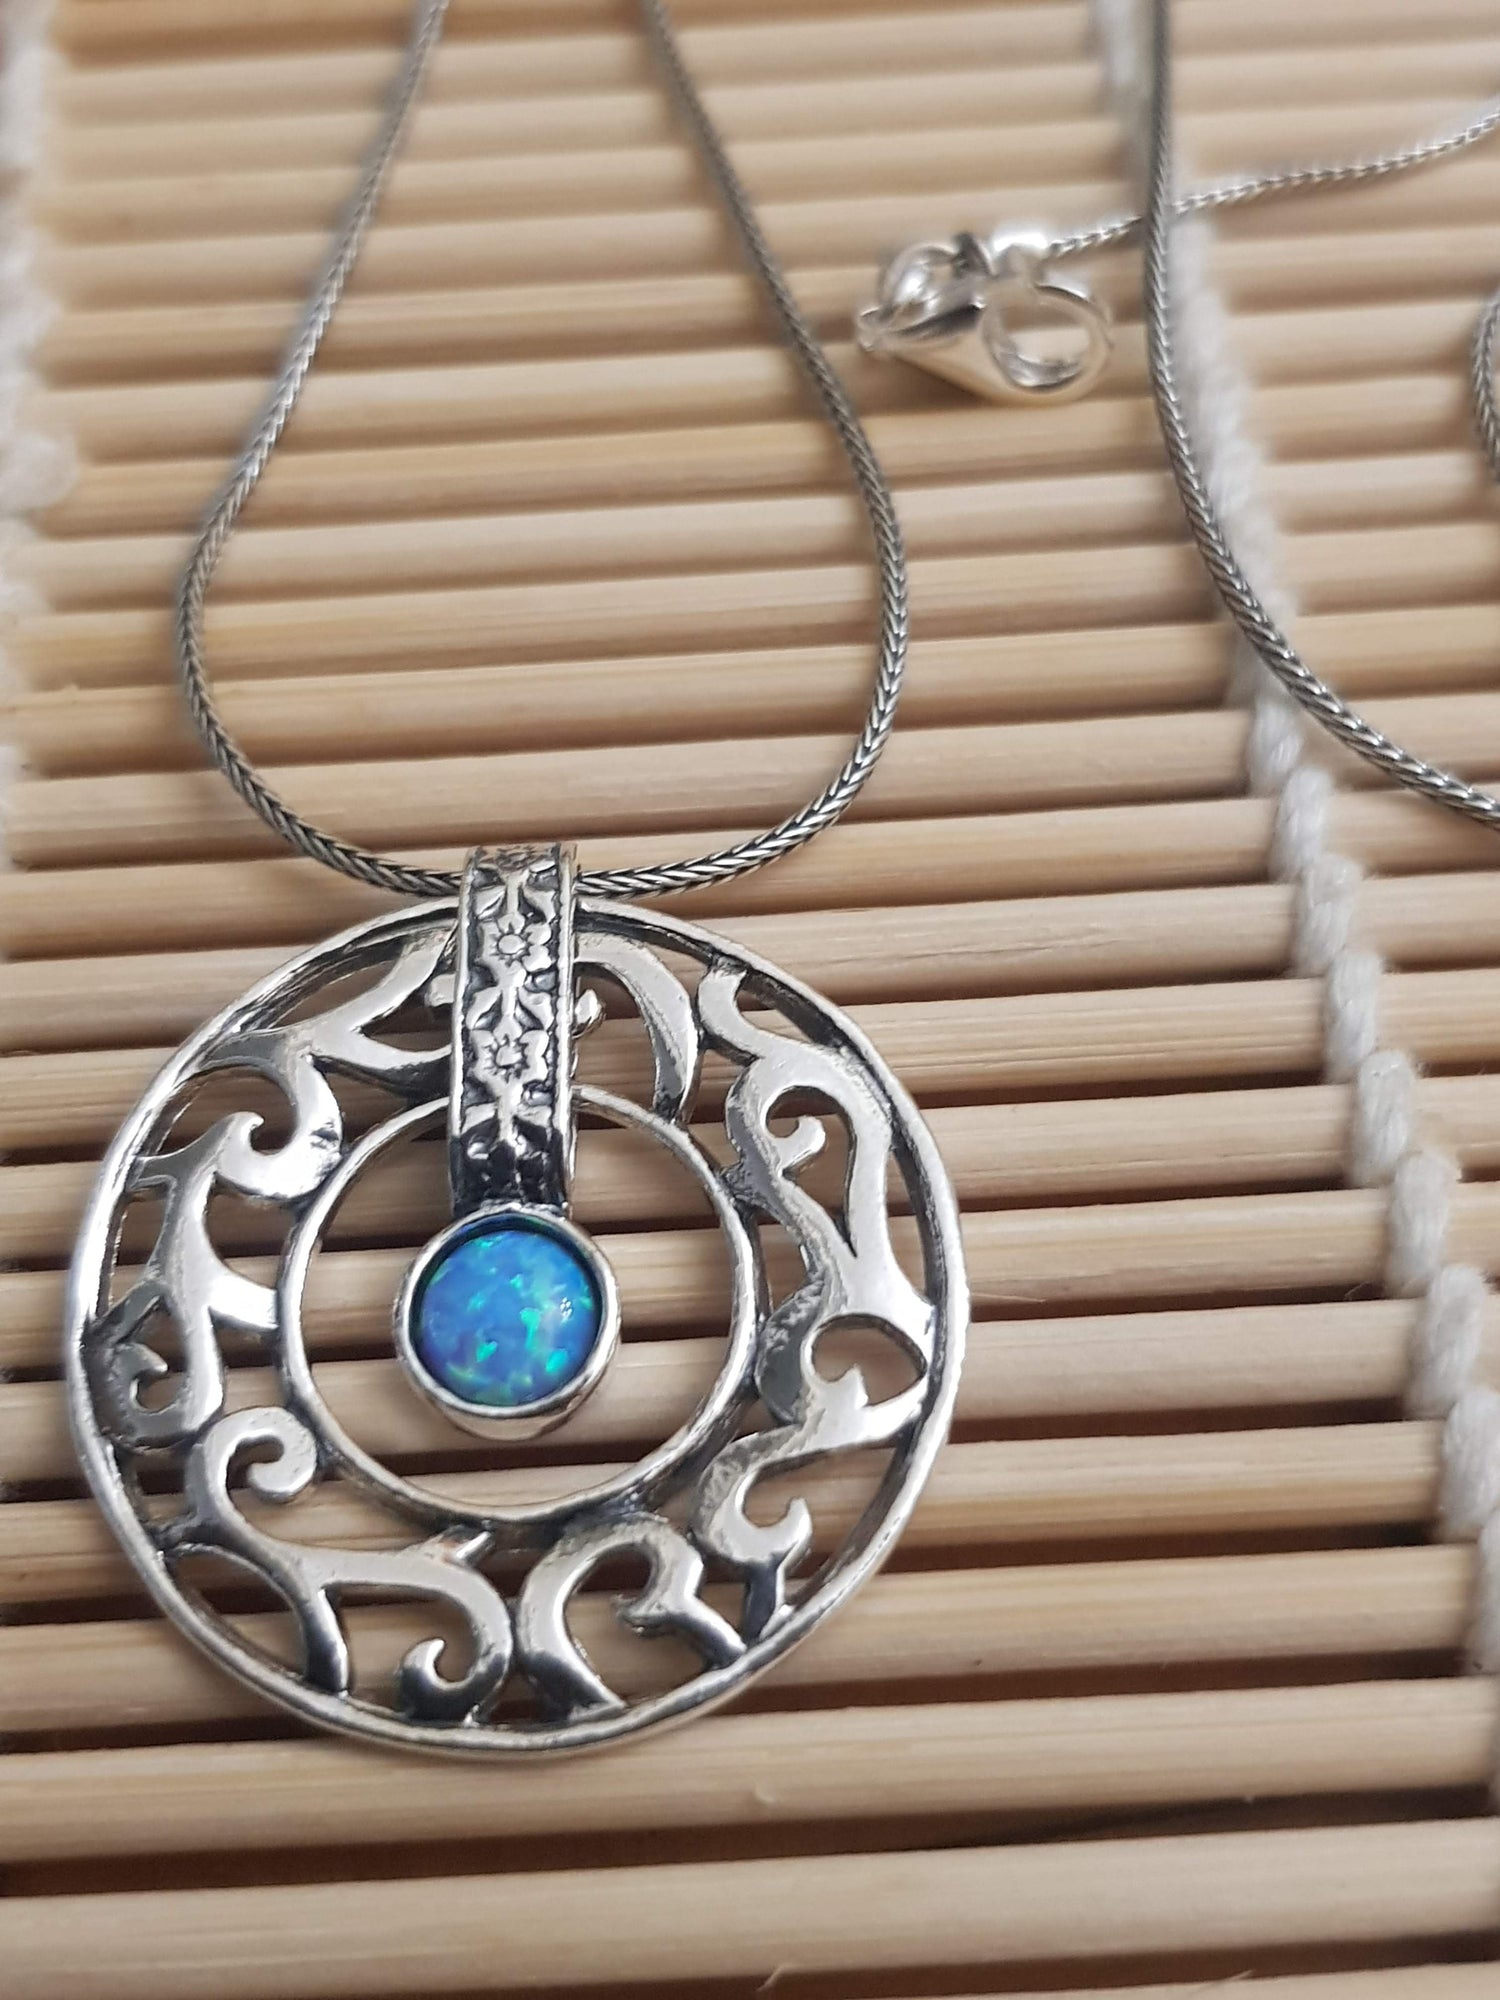 Bluenoemi Jewelry necklaces Israeli jewelry designer in silver necklace for women set with an opal / amethyst / garnet